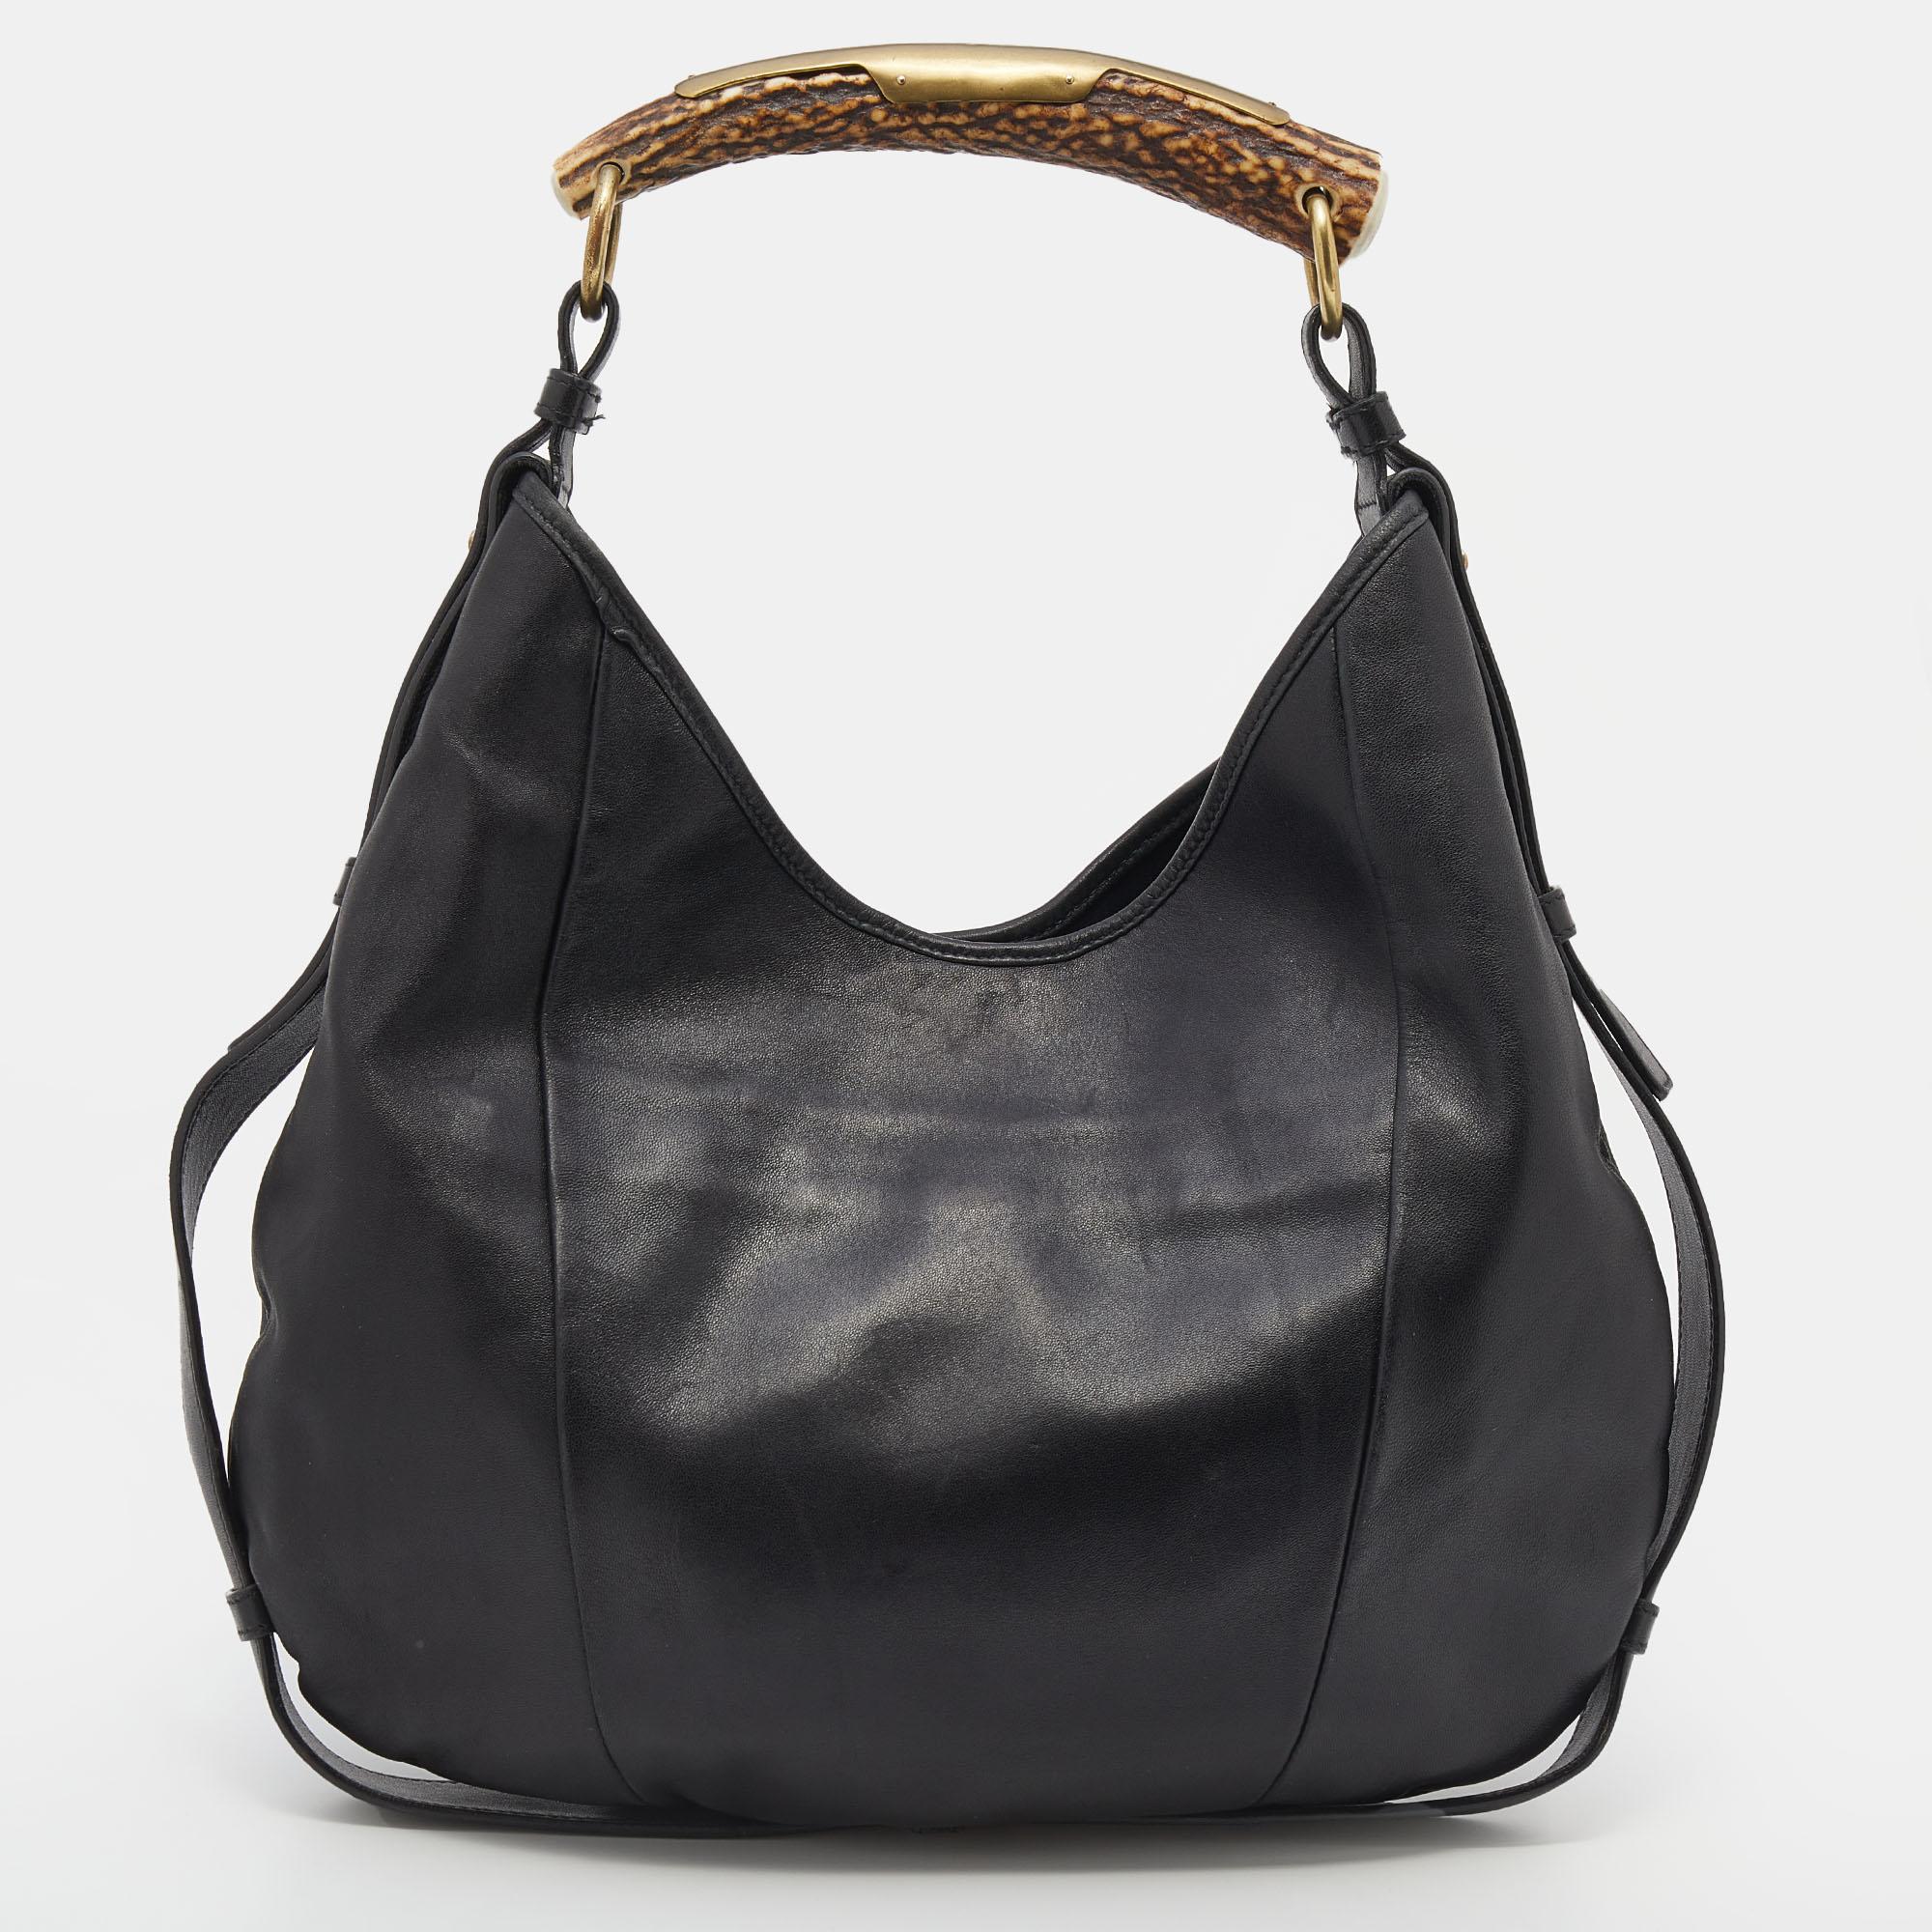 This Mombasa hobo from the House of Yves Saint Laurent is made to grant you complete practicality and luxury! Made from black leather, this hobo is decorated with a horn detail. It has a spacious satin-lined interior and gold-tone hardware. This